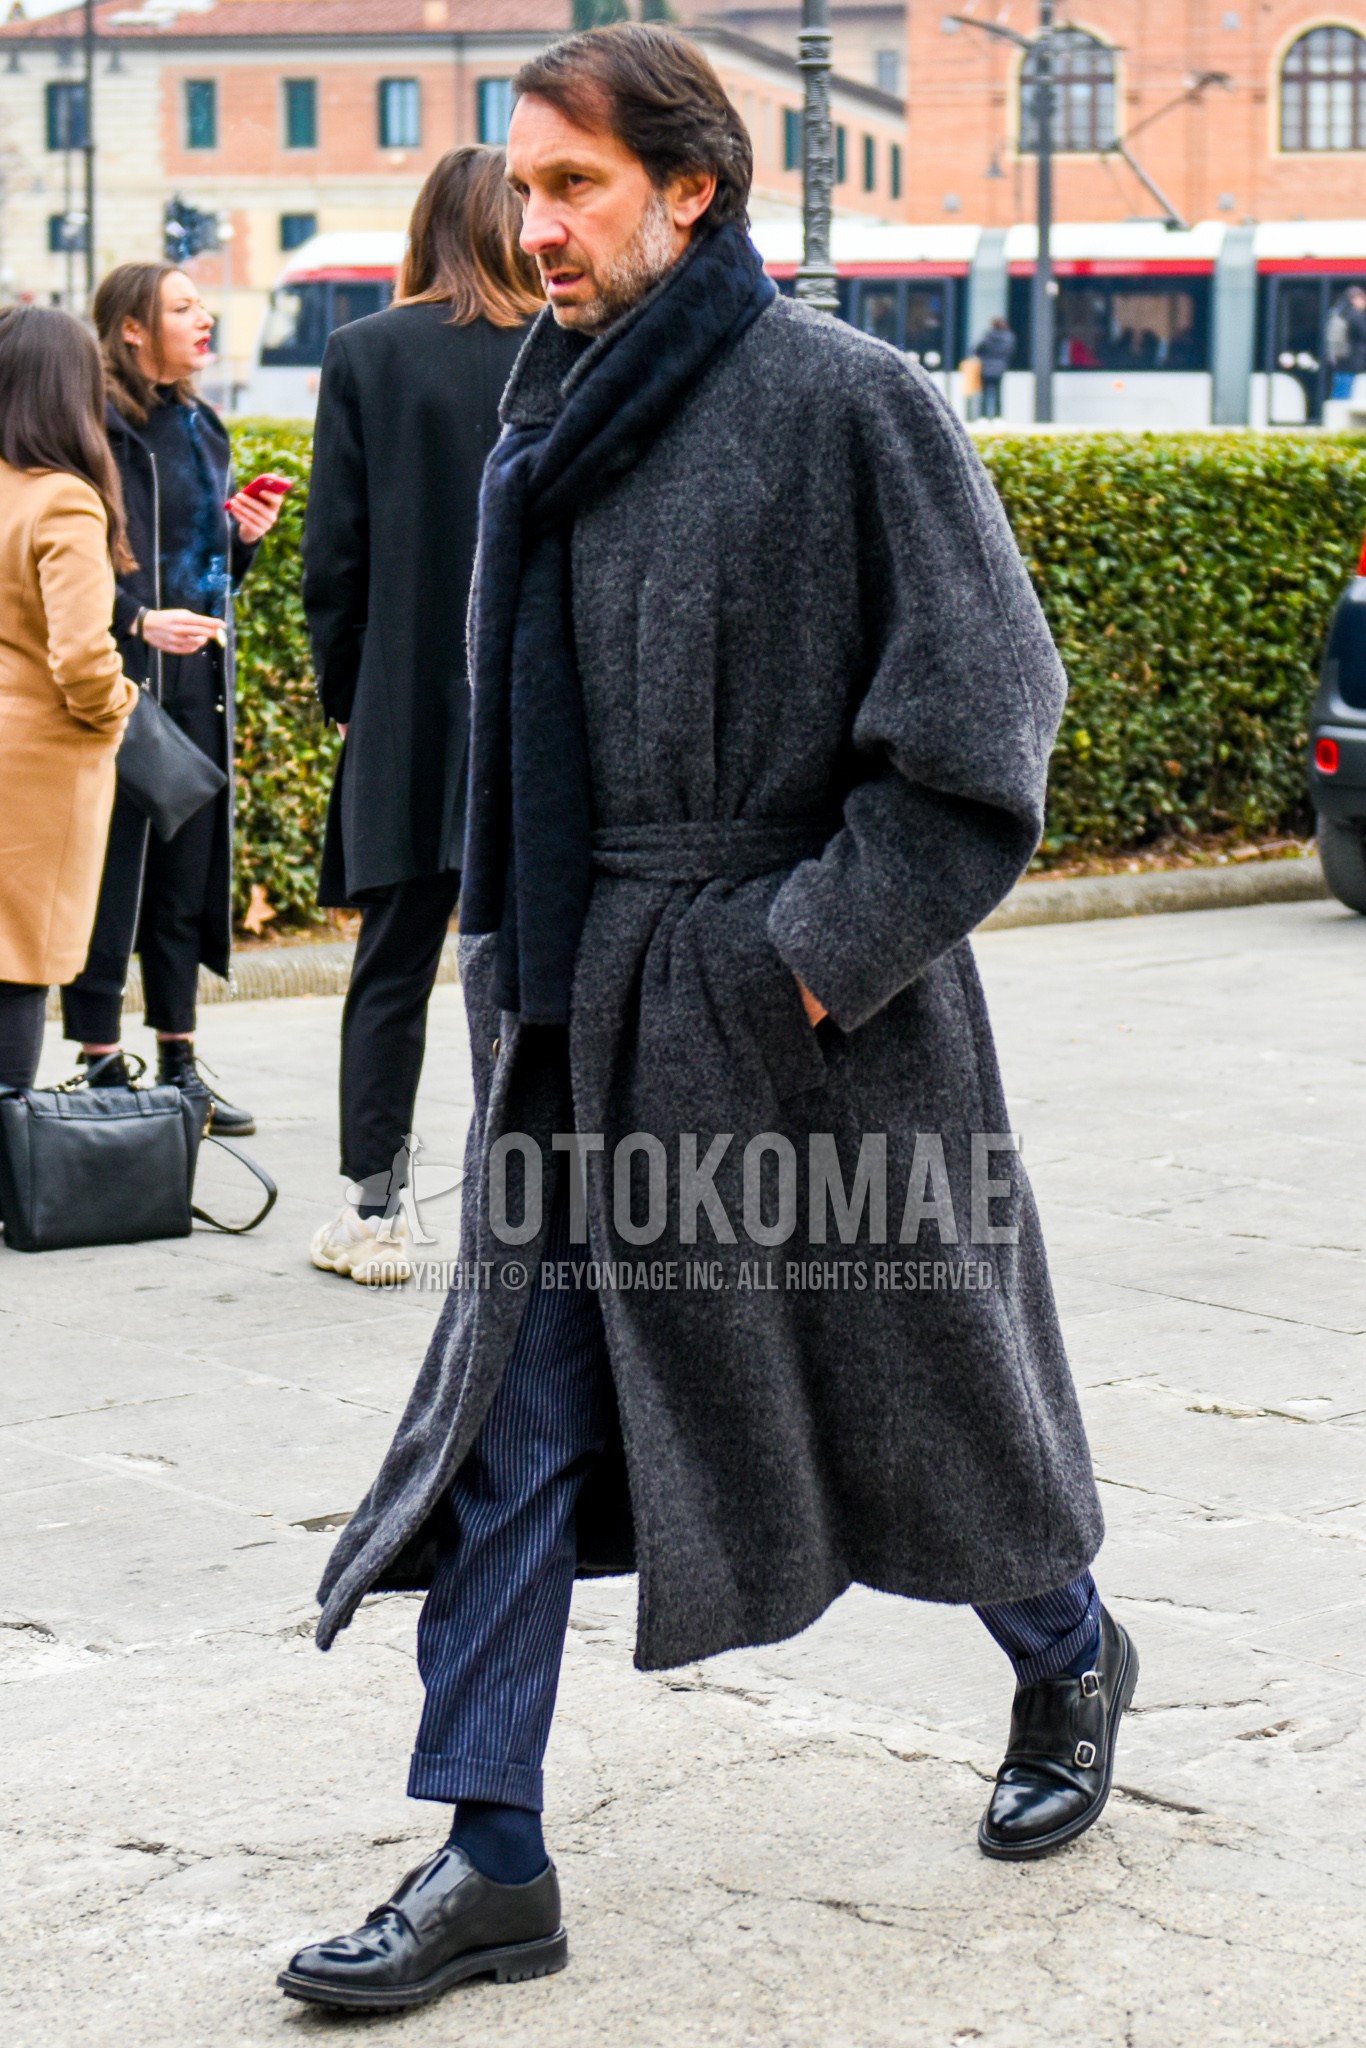 Men's winter outfit with navy plain scarf, dark gray plain belted coat, navy plain slacks, navy plain socks, black monk shoes leather shoes.